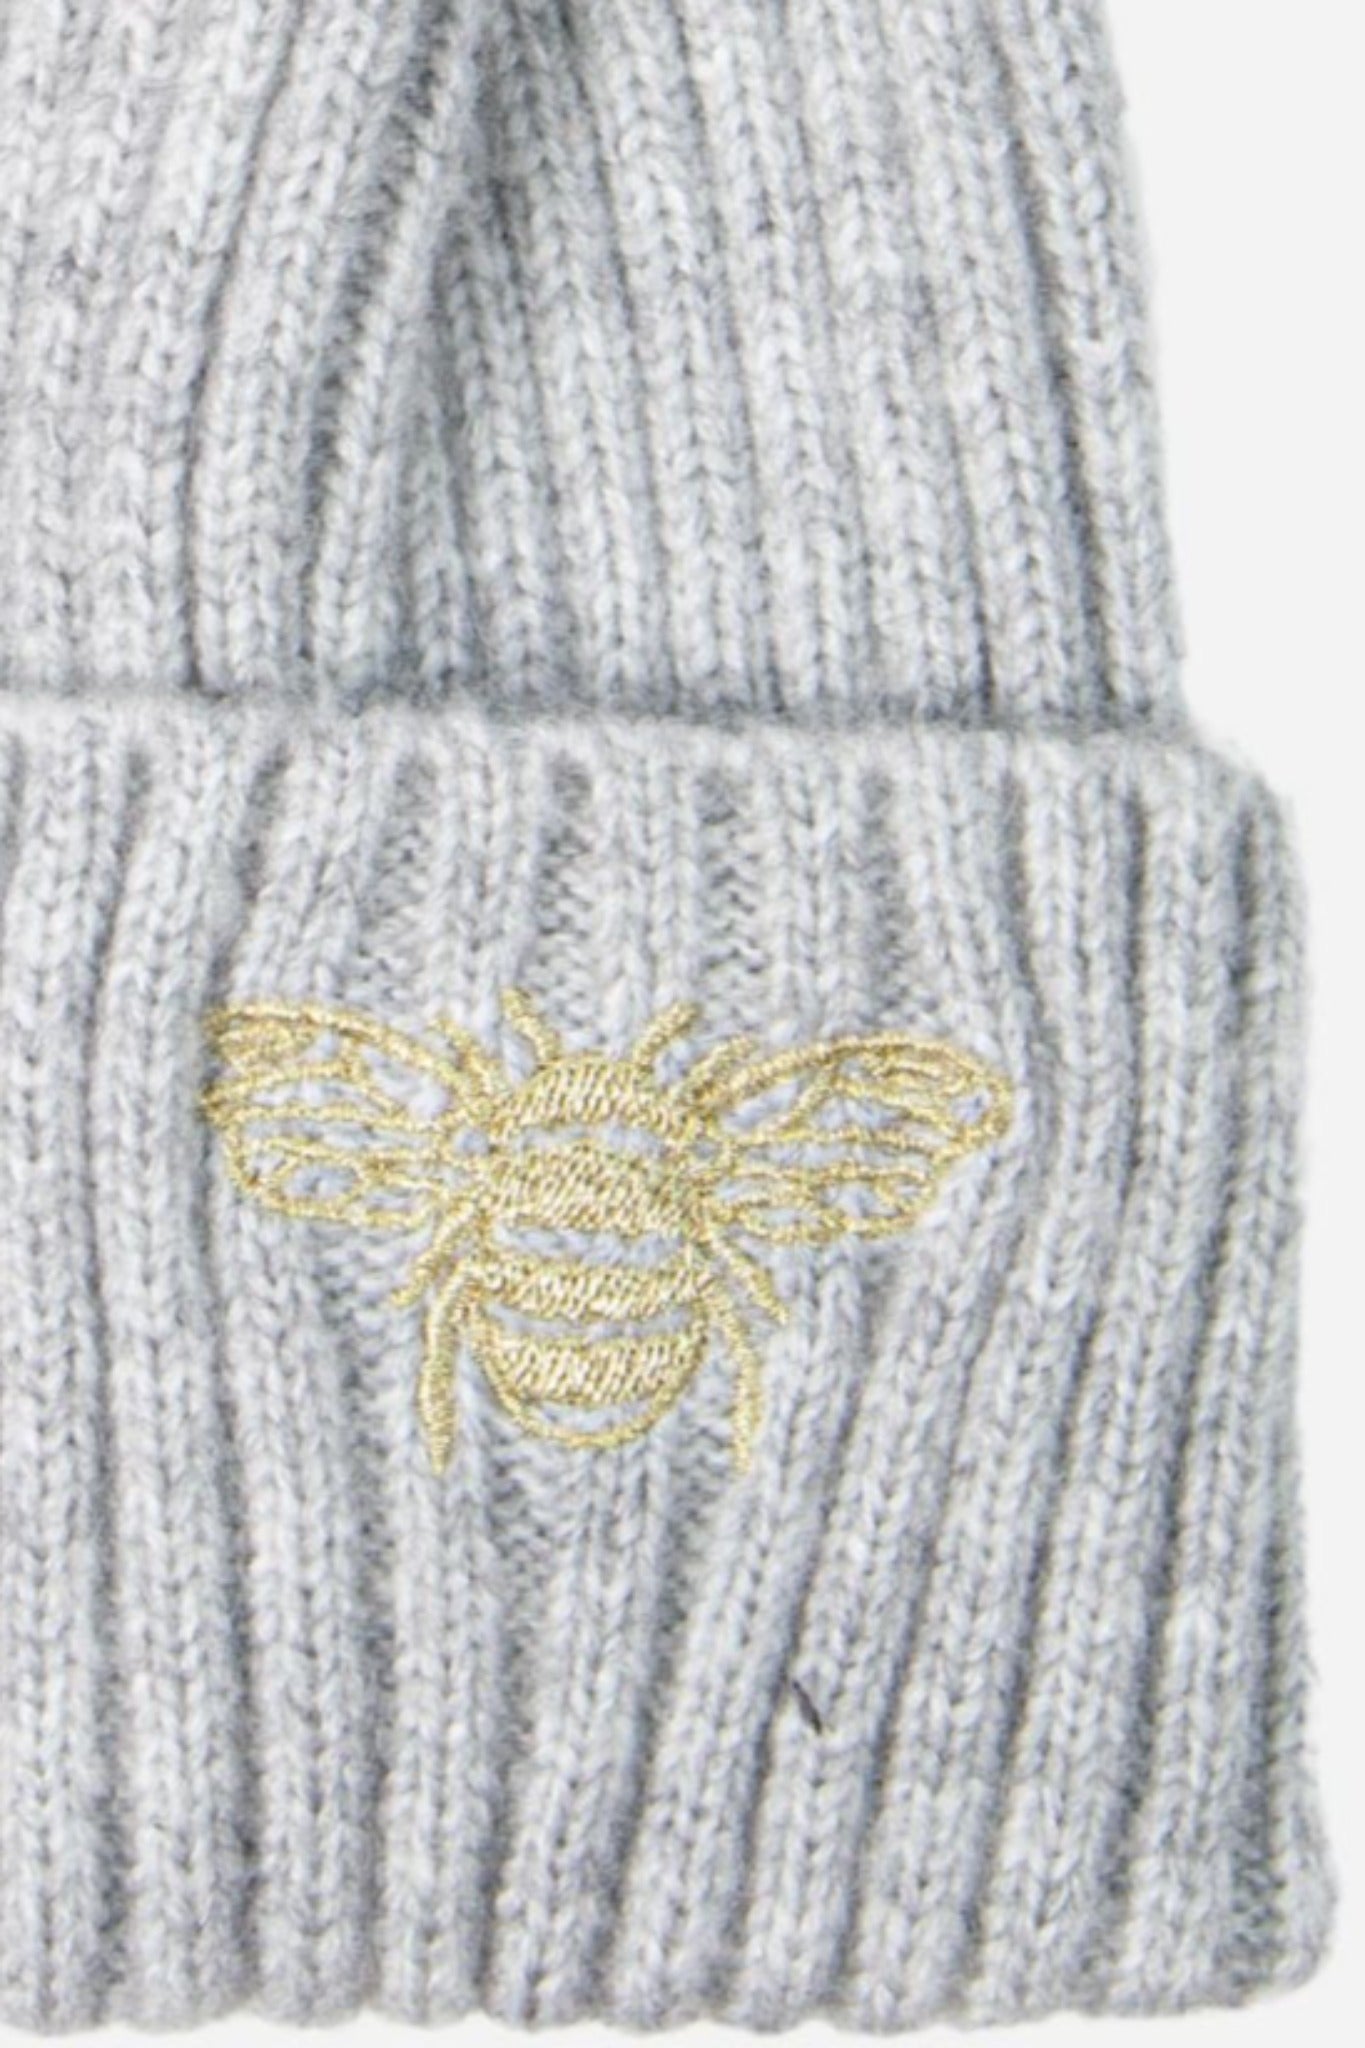 close up of the embroidred bee motif